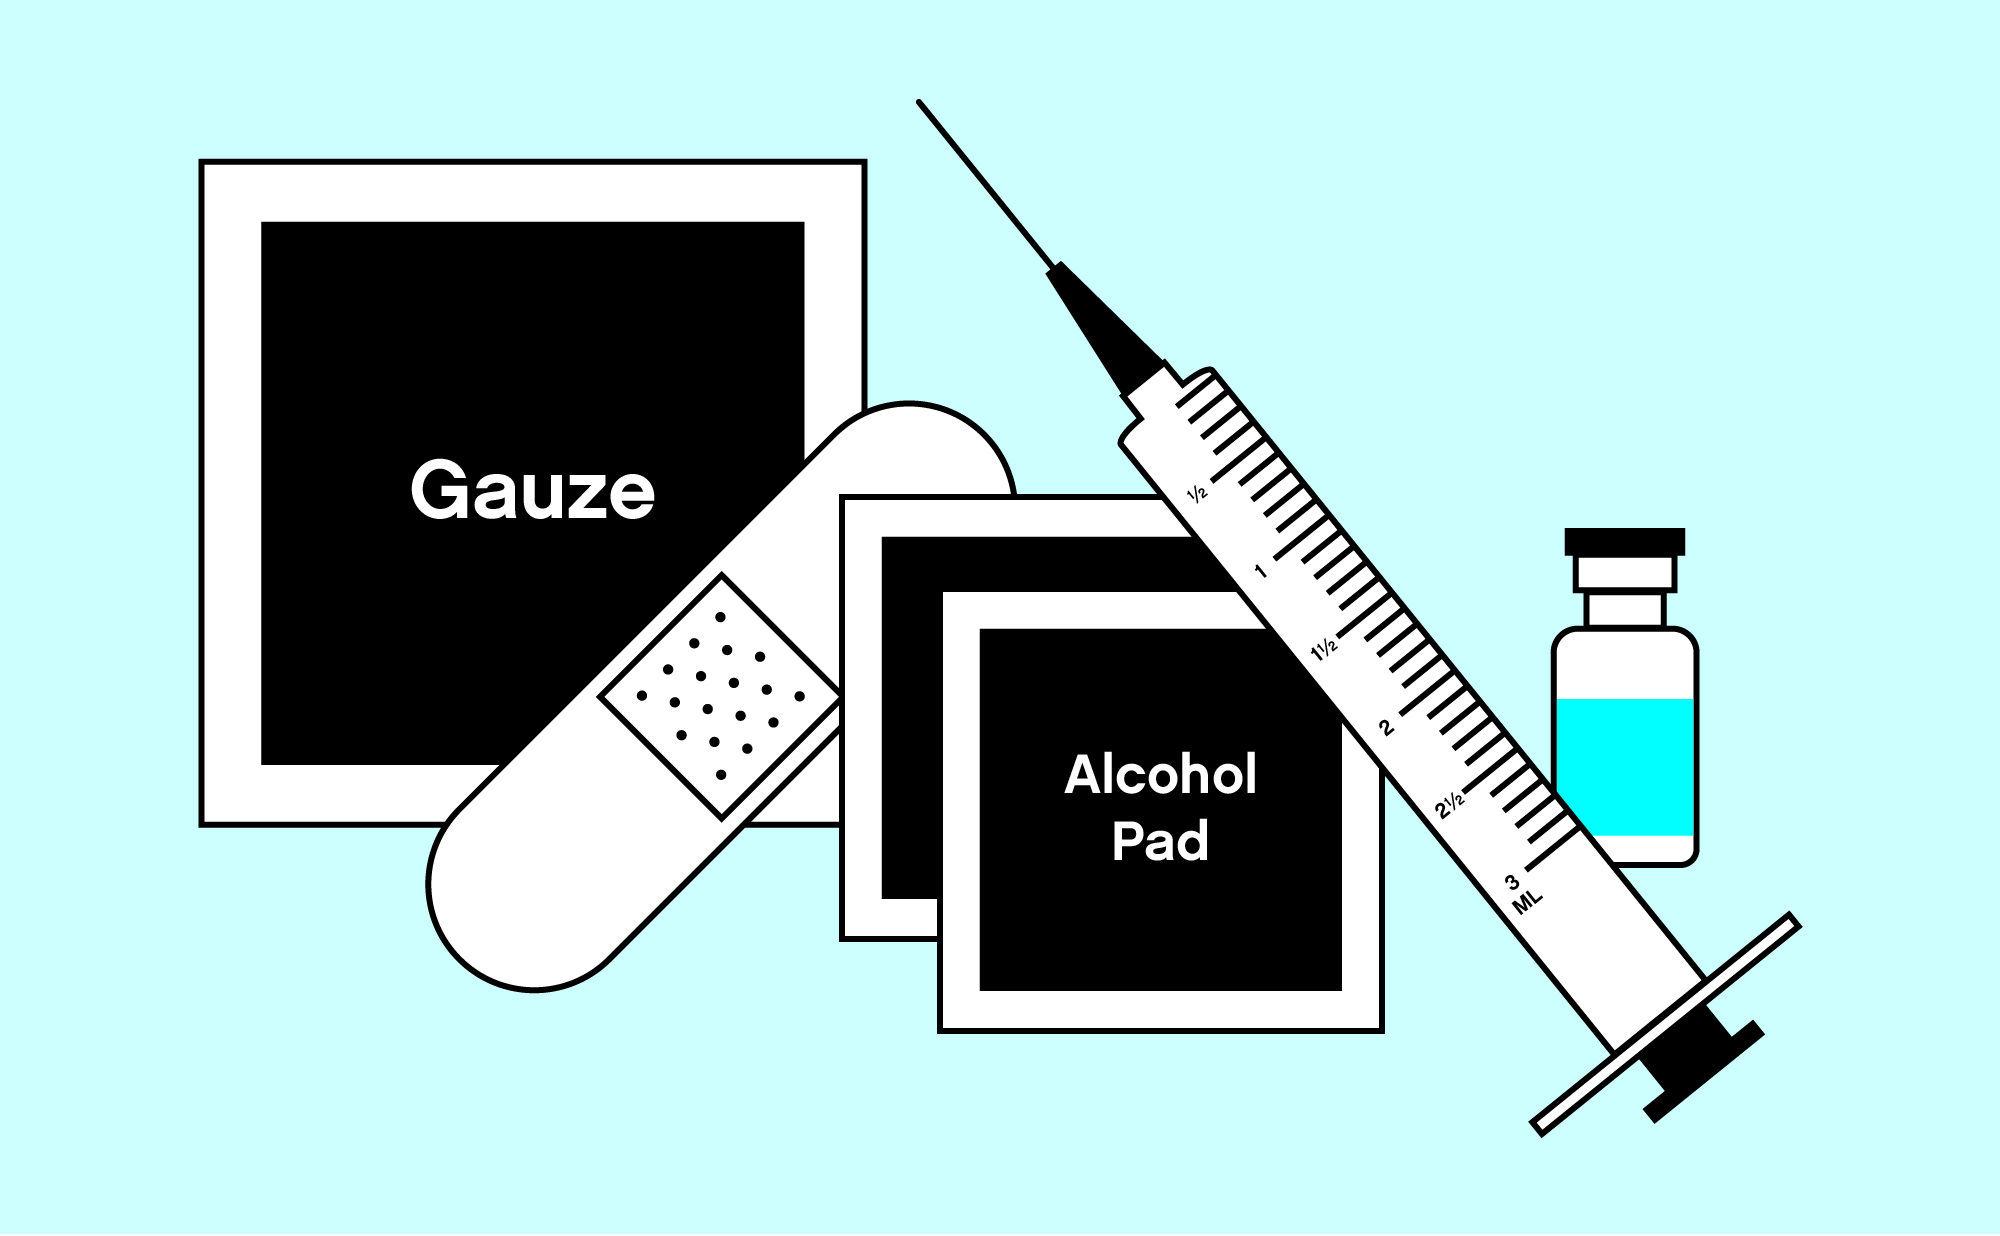 Icons of gauze, a bandaid, an alcohol pad, a syringe, and a vial of hormones.